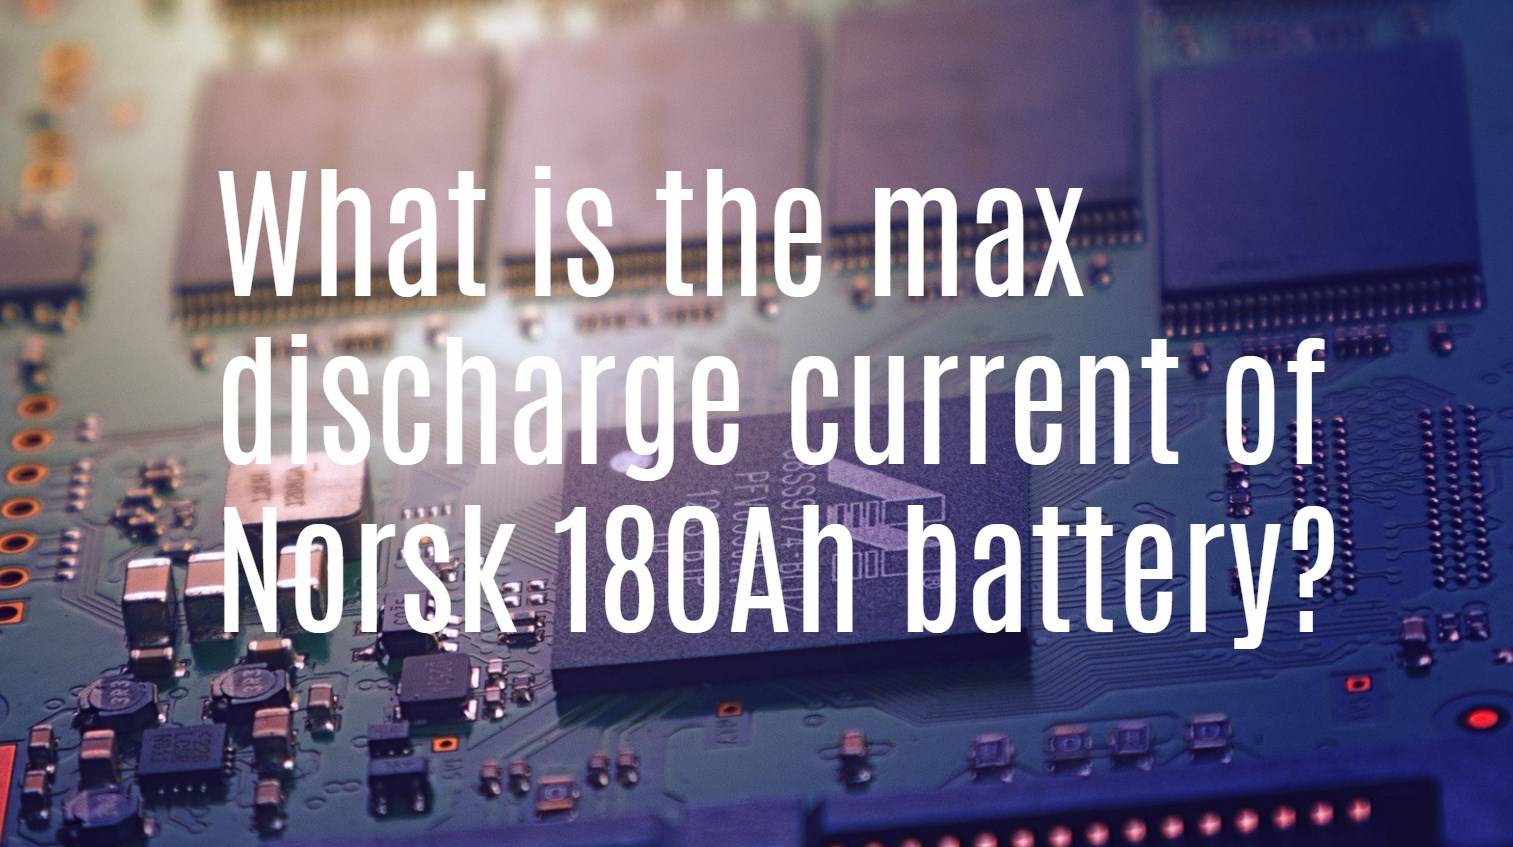 What is the max discharge current of Norsk 180Ah battery?